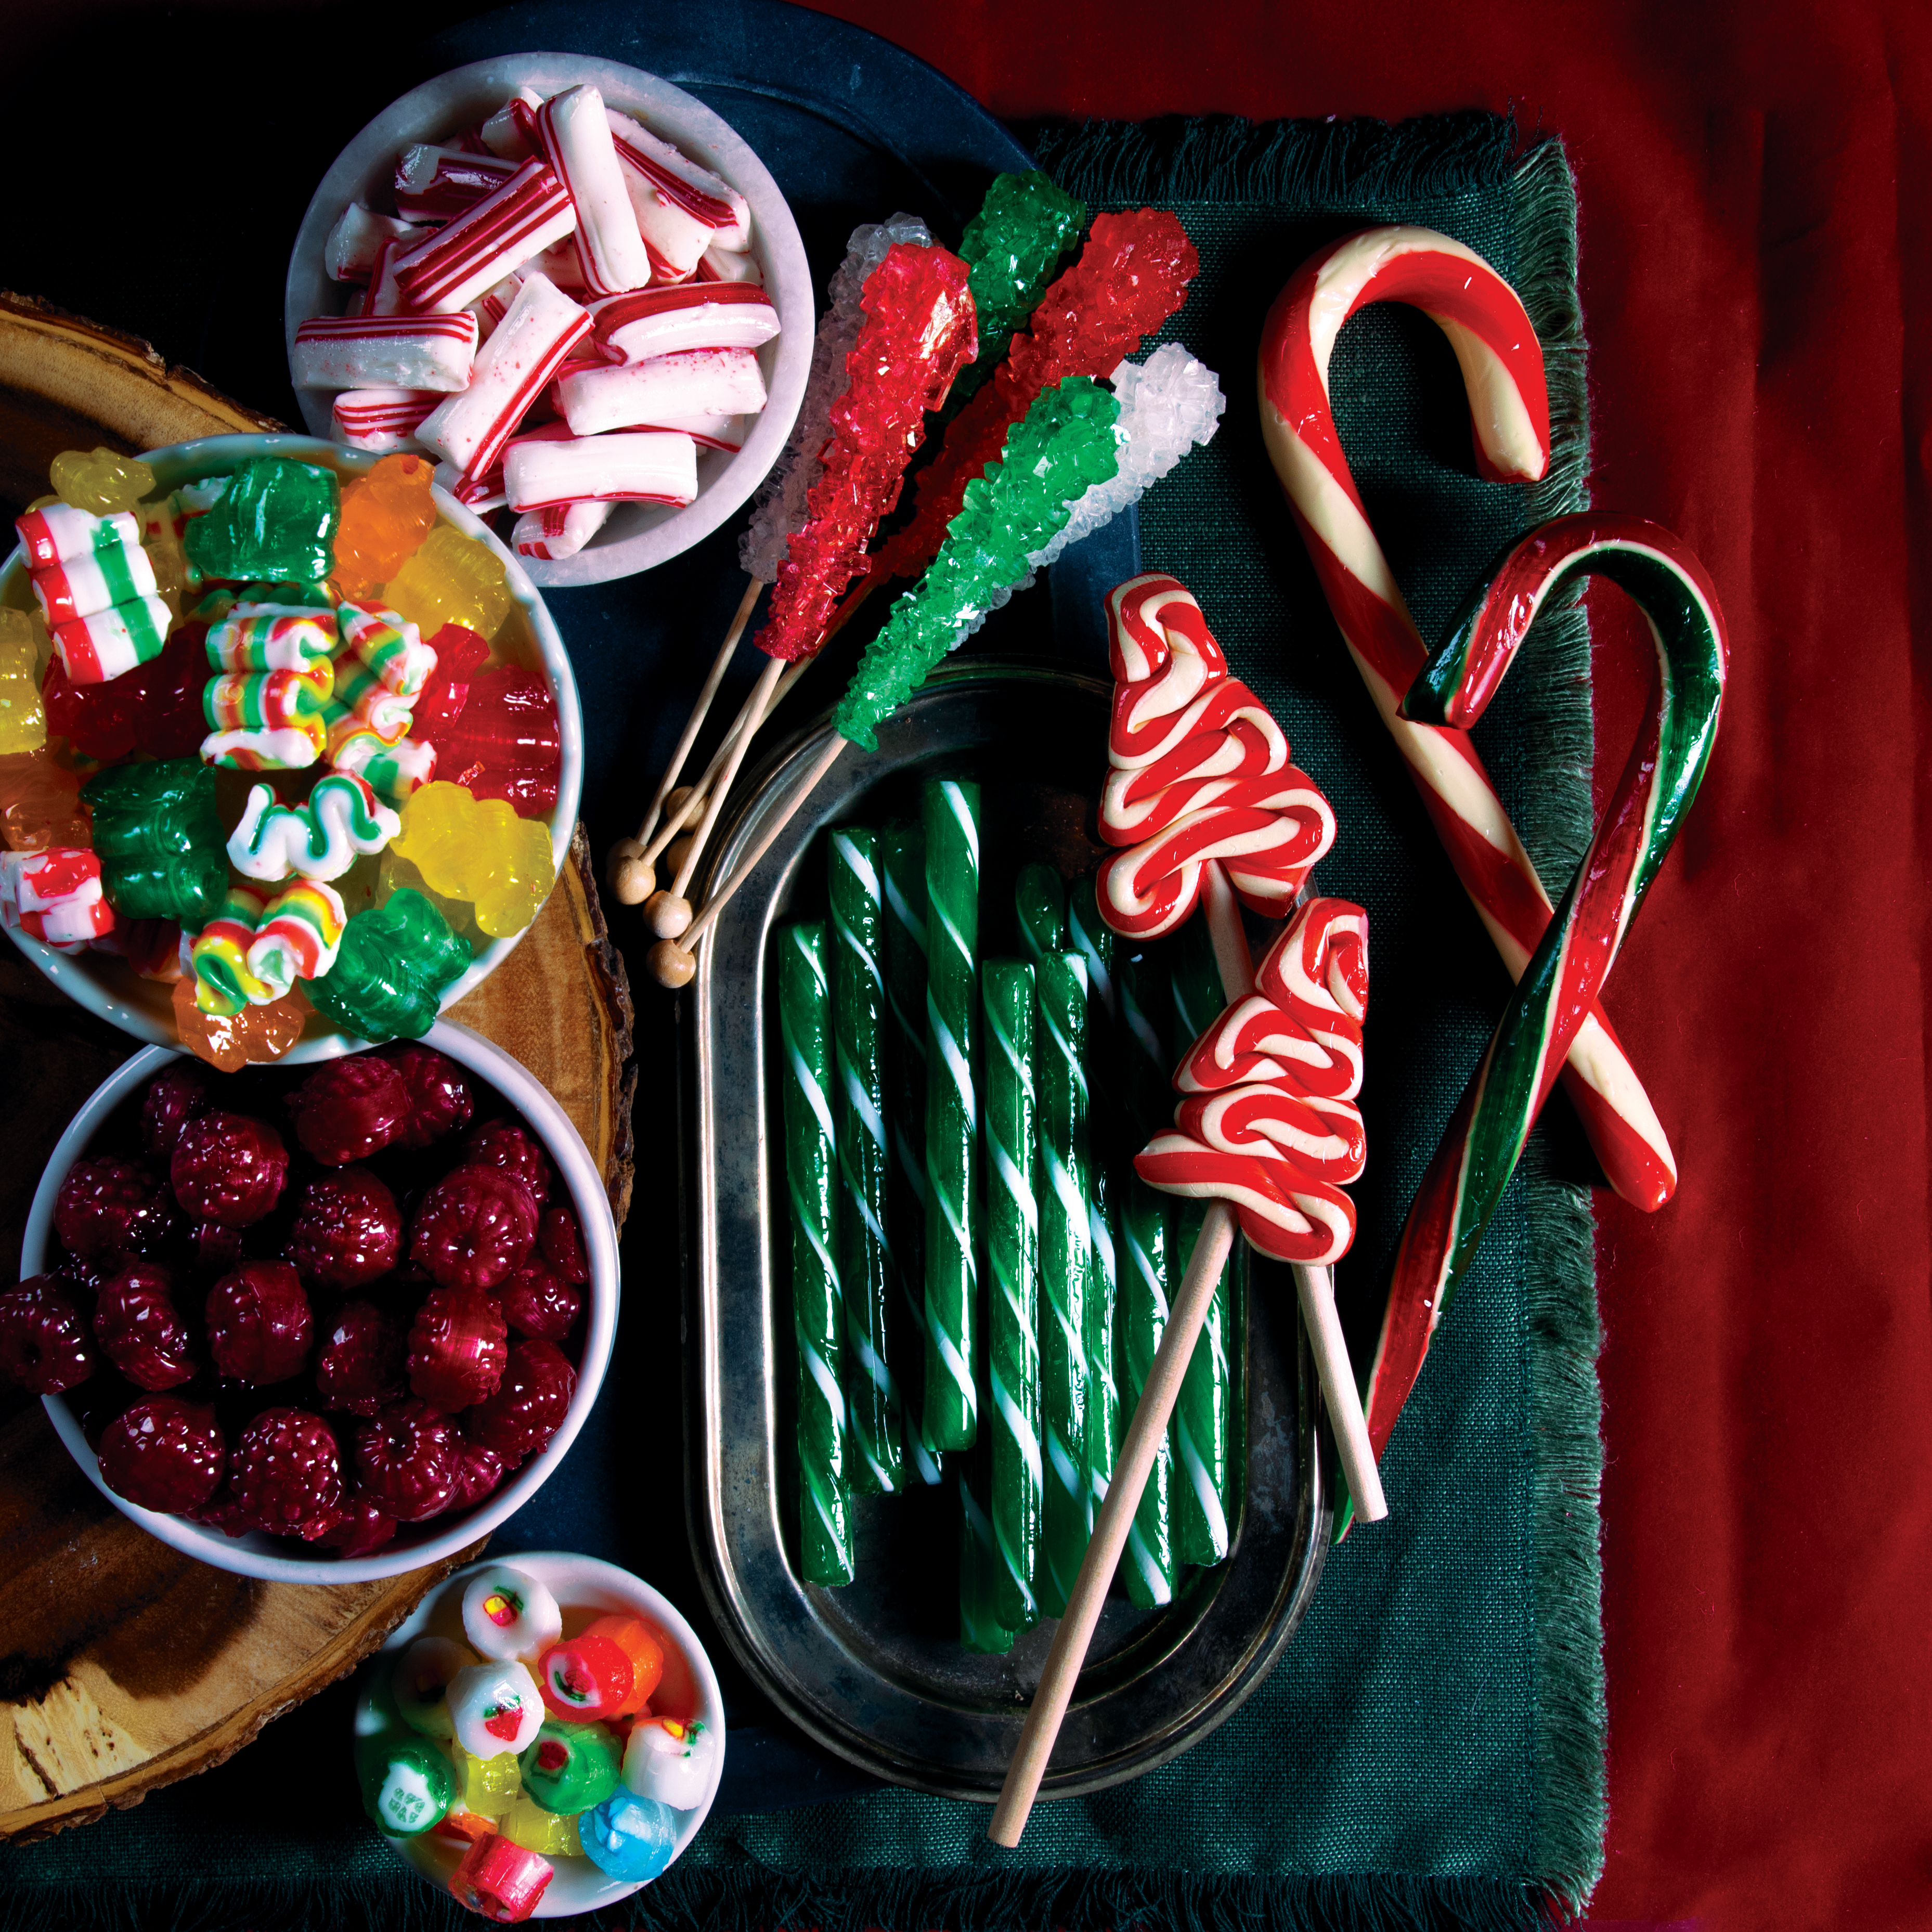 Make the Holidays Extra Cozy With Old Fashioned Candy